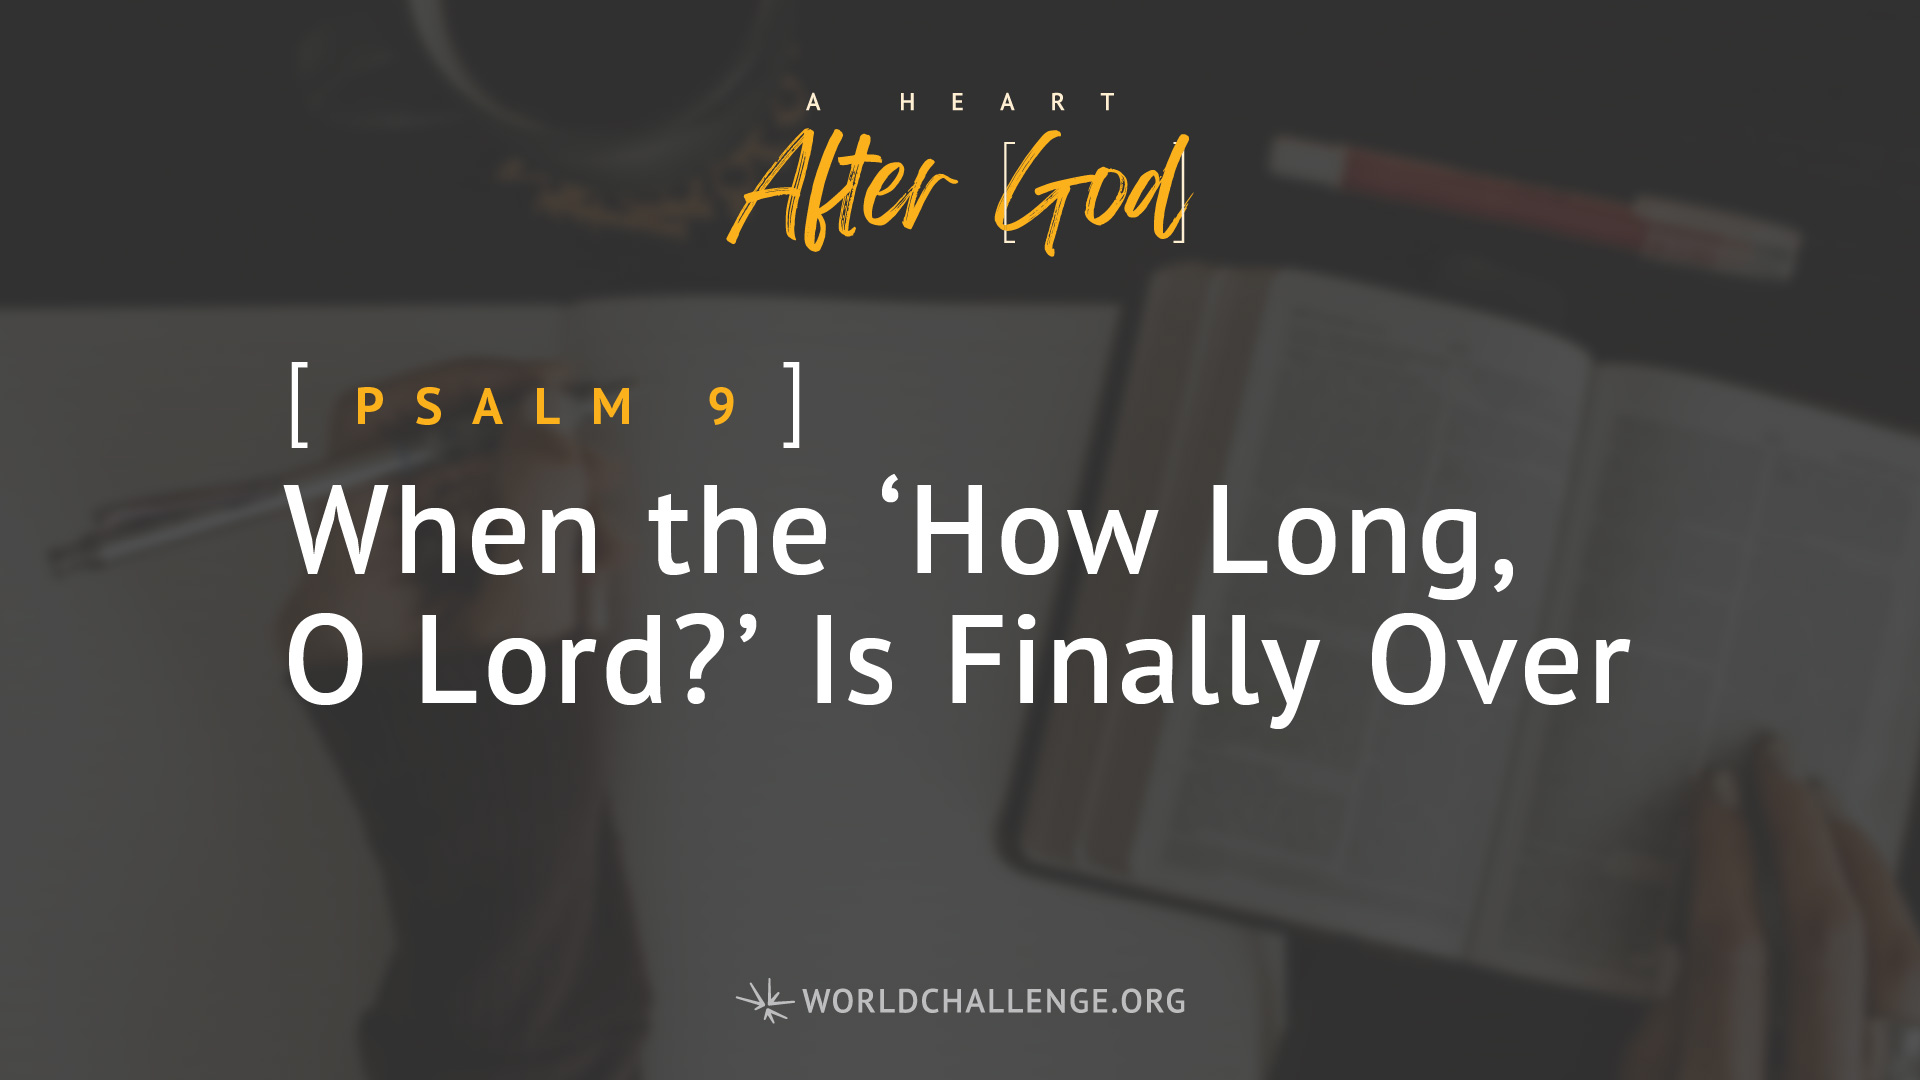 Psalm 9 - When the ‘How Long, O Lord?’ Is Finally Over